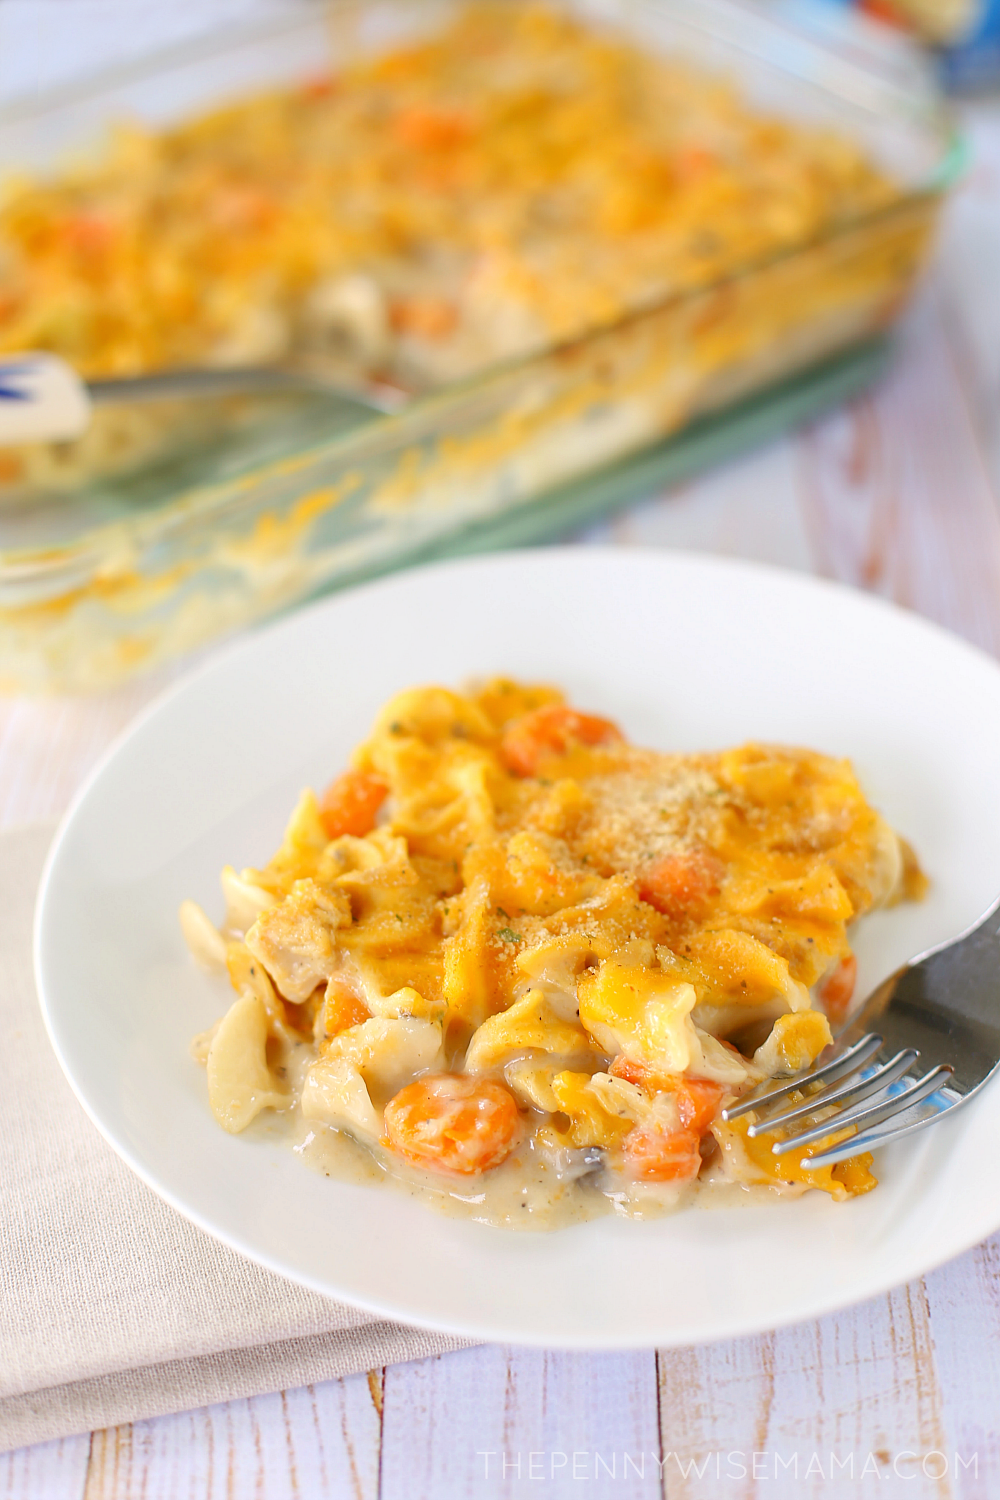 Cheesy Chicken Noodle Casserole - easy 20 min recipe that uses canned soup!